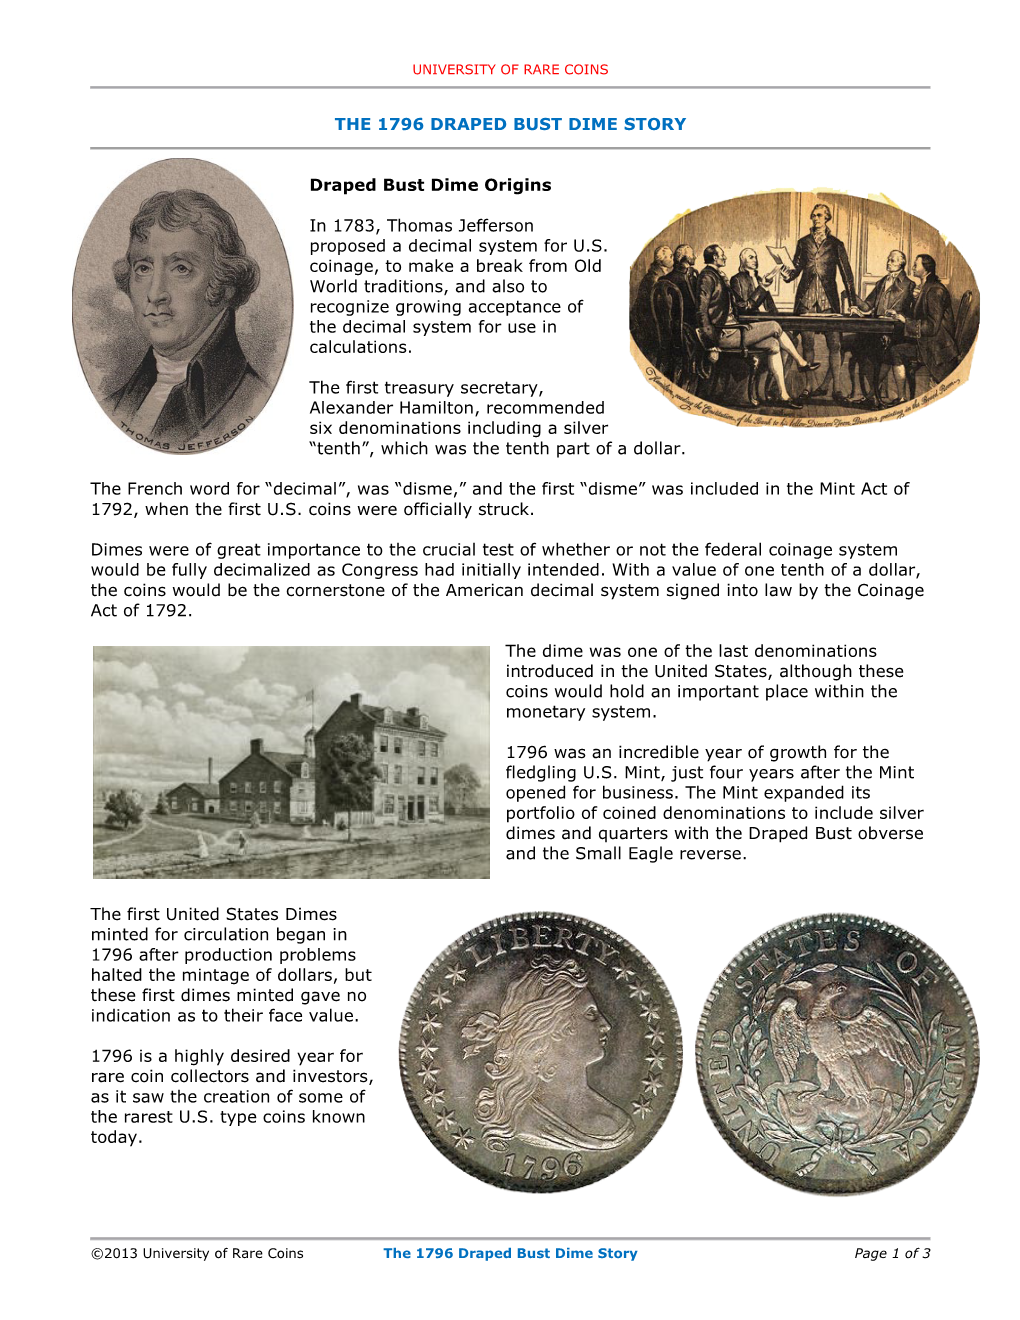 The 1796 Draped Bust Dime Story